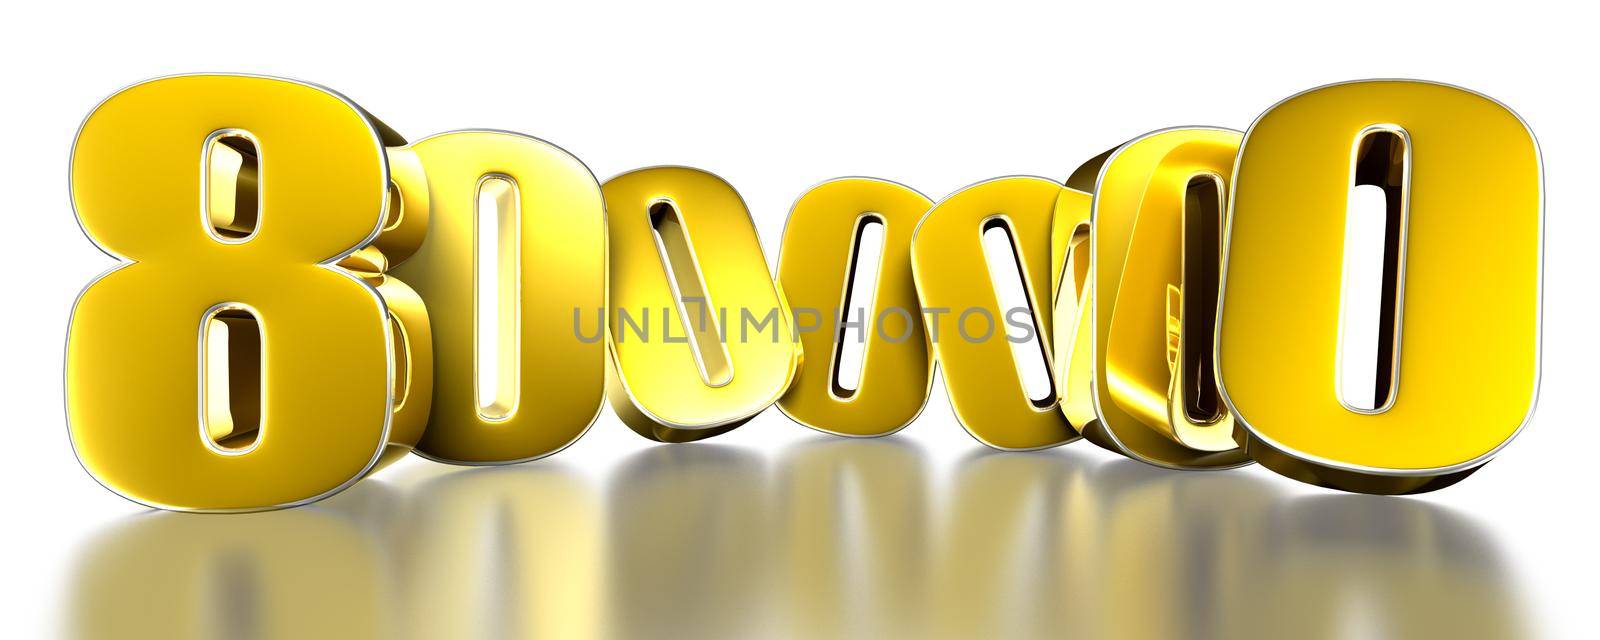 8 000 000 gold 3D illustration on white background with clipping path. by thitimontoyai